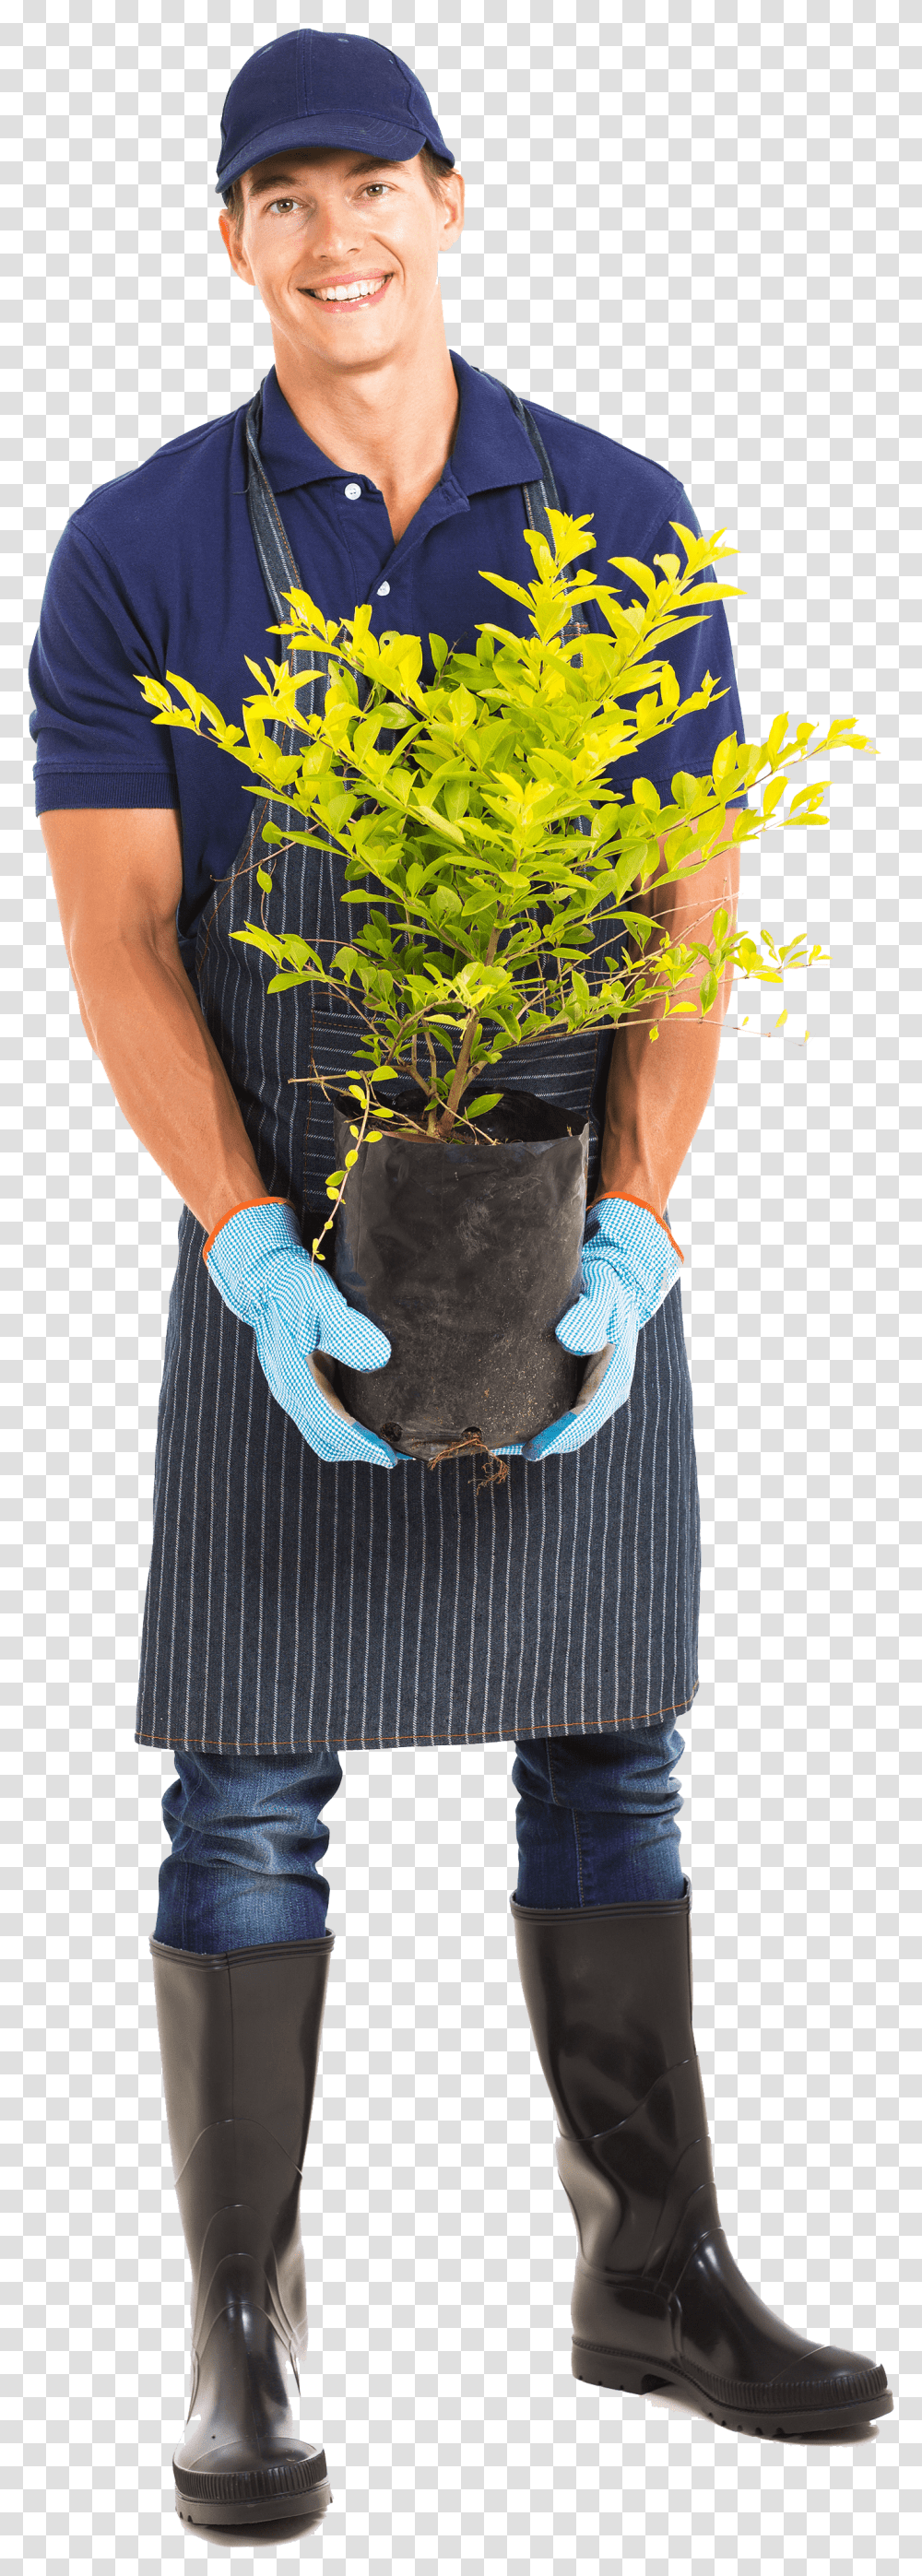 Download Hd Honest And Dependable Gardener, Clothing, Person, Plant, Tree Transparent Png